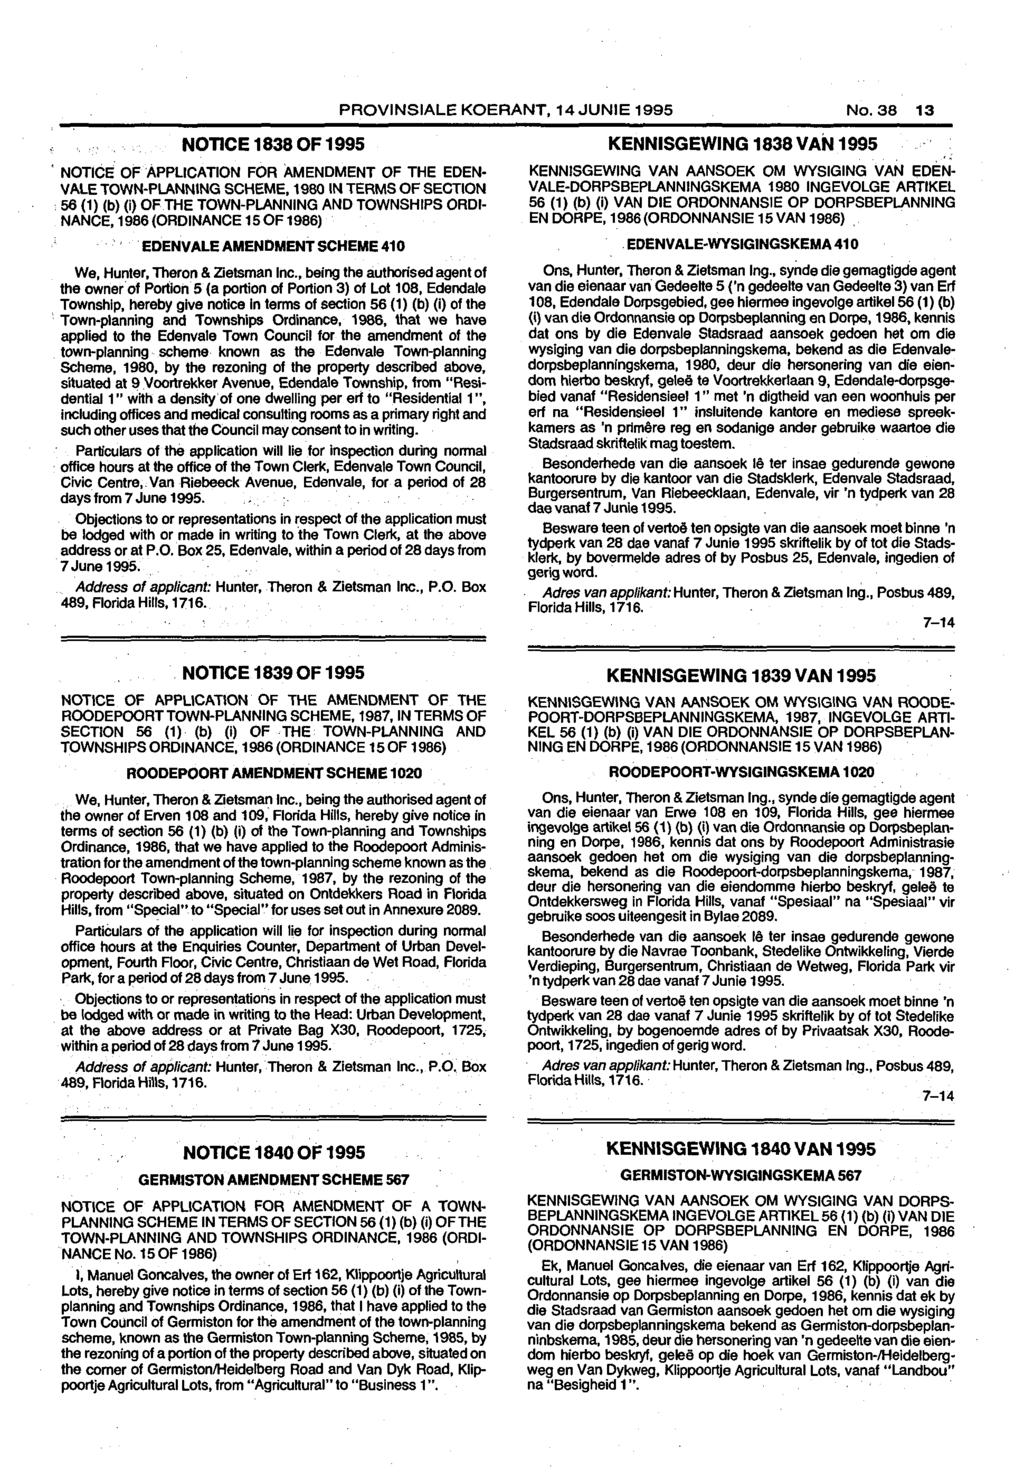 PROVINSIALE KOERANT, 14JUNIE 1995 No. 13 NOTICE 18 OF 1995 ' NOTICE OF APPLICATION FOR AMENDMENT OF THE EDEN VALE TOWN-PLANNING SCHEME, 1980 IN TERMS OF SECTION 56 (1) (b) (i) OF.